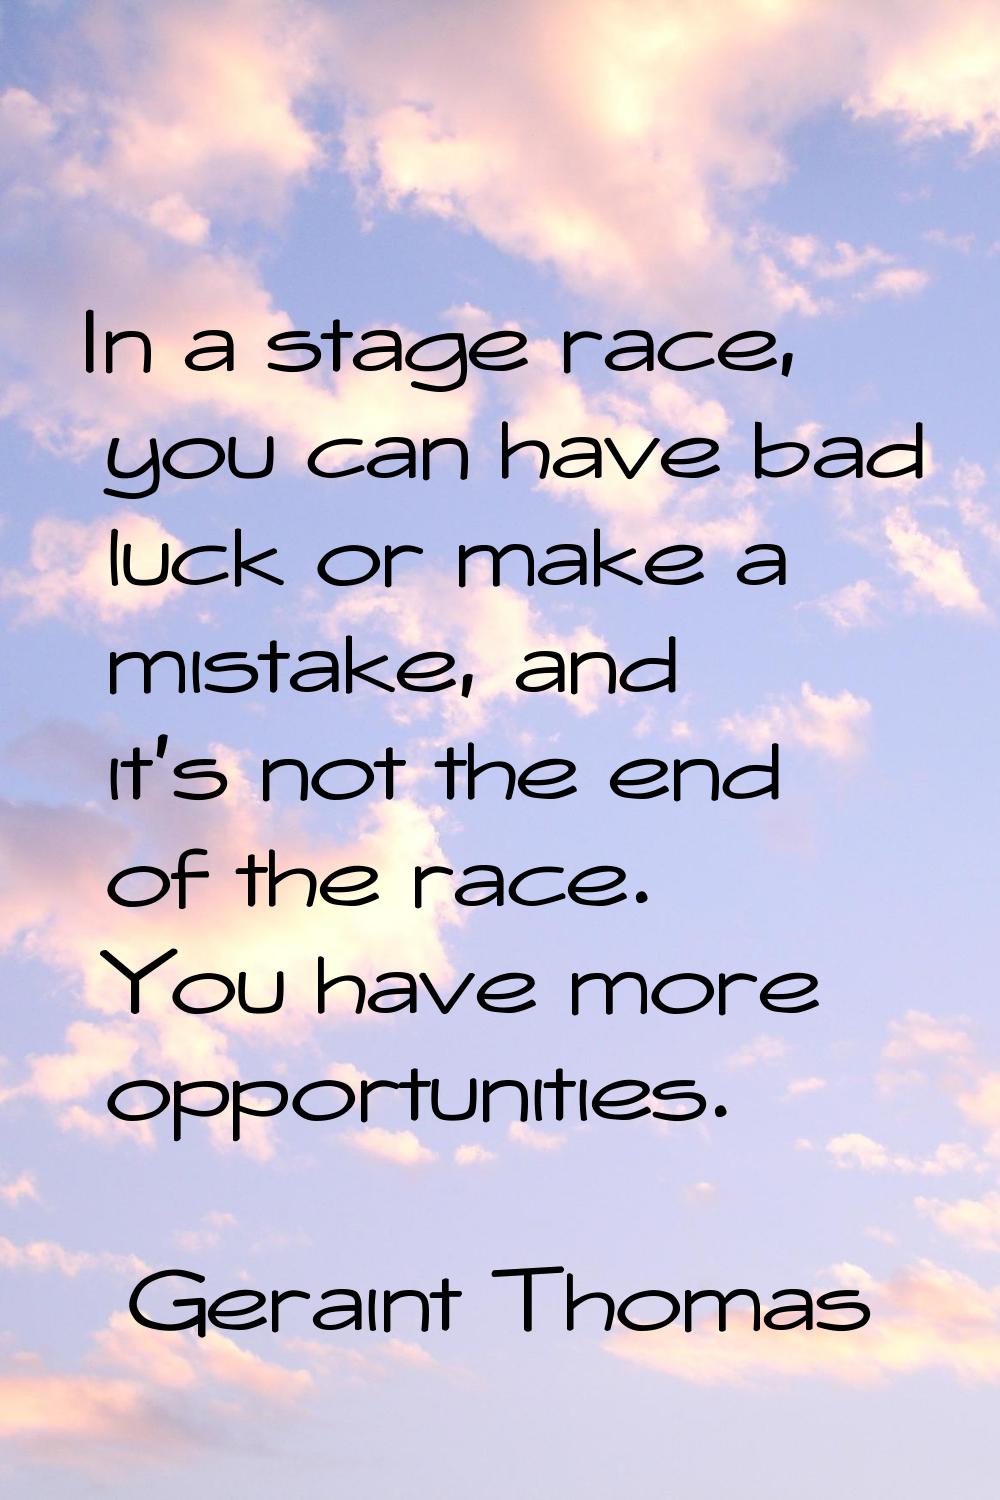 In a stage race, you can have bad luck or make a mistake, and it's not the end of the race. You hav